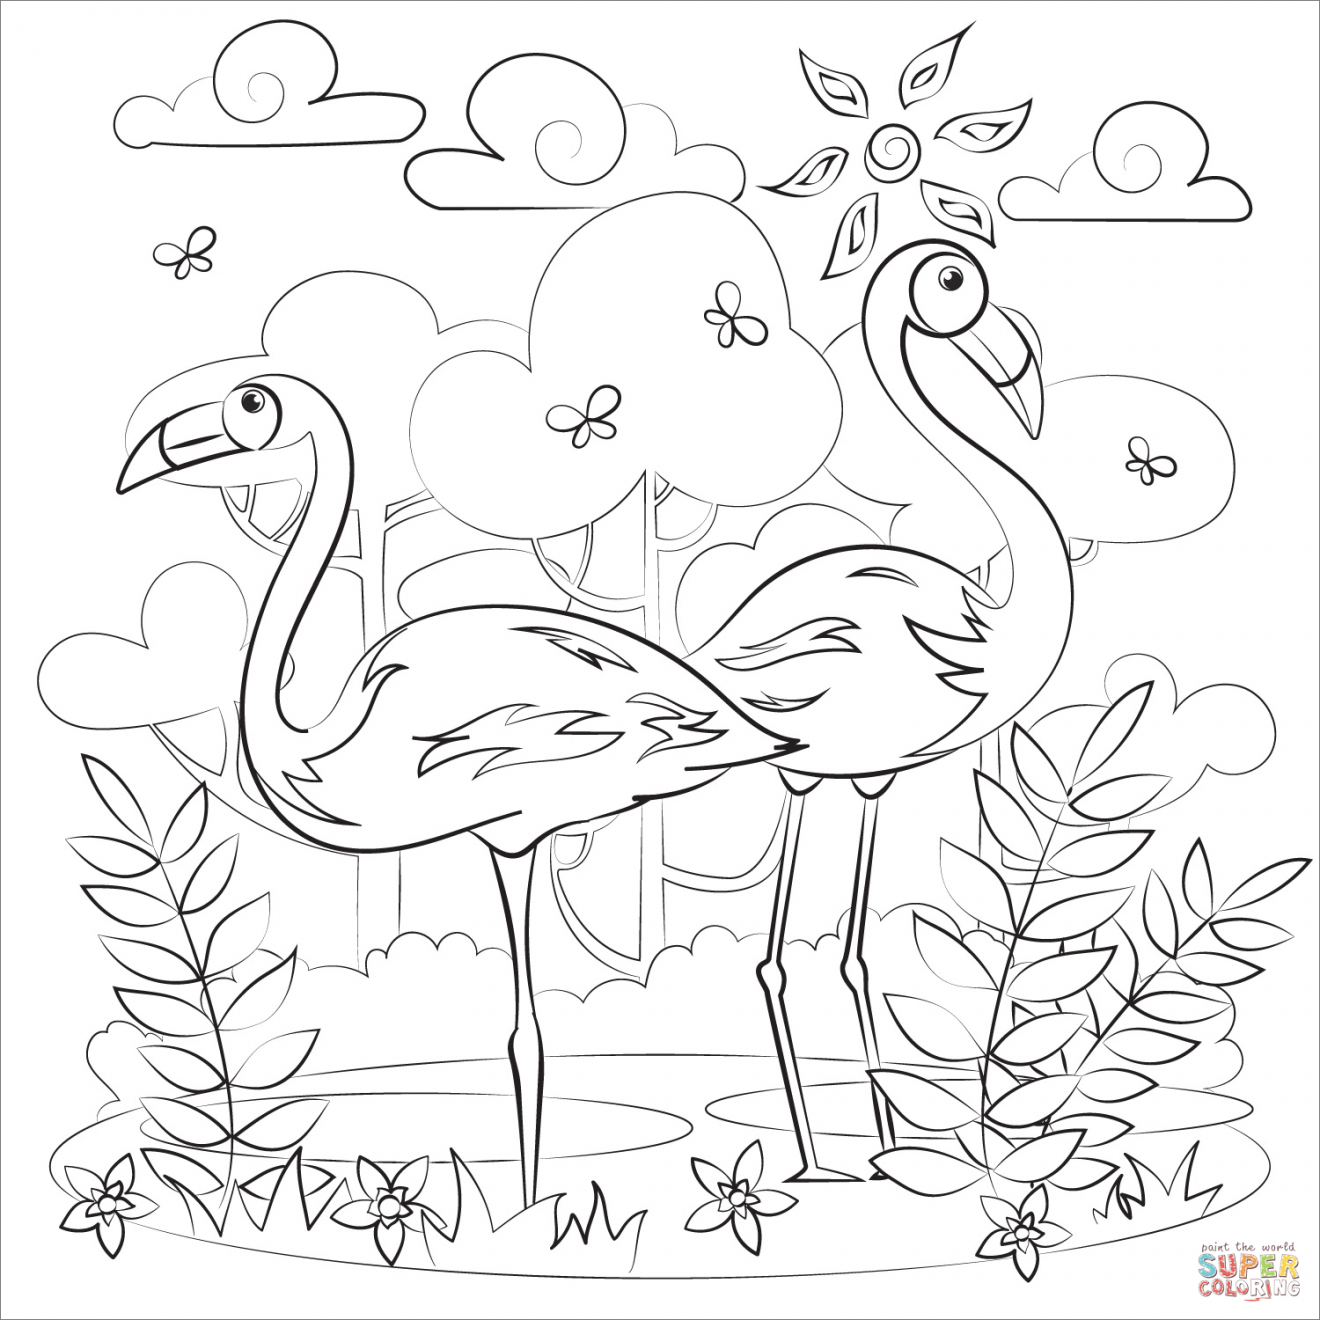 Bird Coloring Pages - What is Your Favorite Bird?